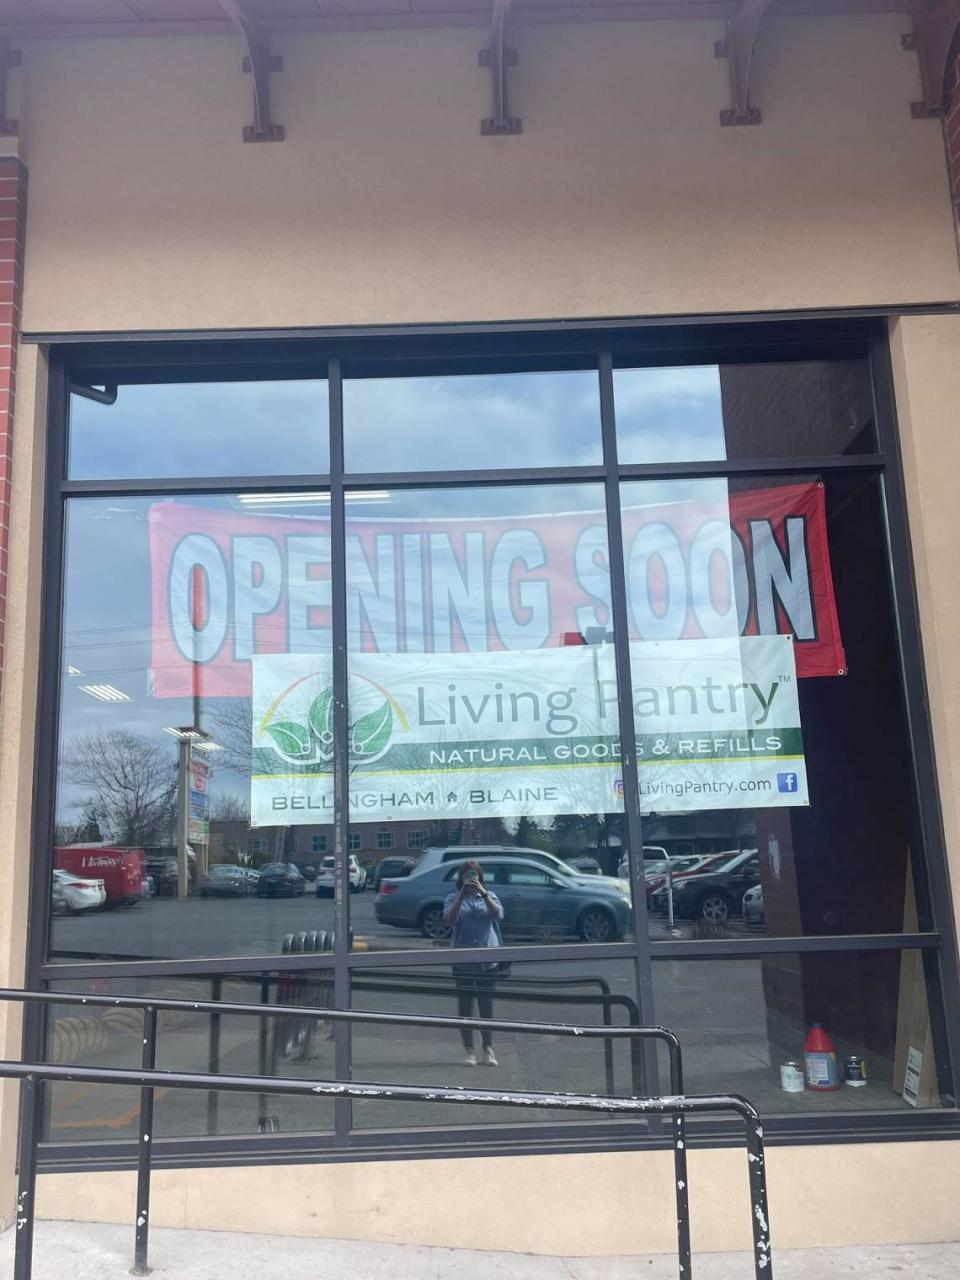 Living Pantry, a eco-friendly and natural goods store opening soon next to Trader Joe’s at 2410 James St, Bellingham, Washington. Alyse Smith/The Bellingham Herald